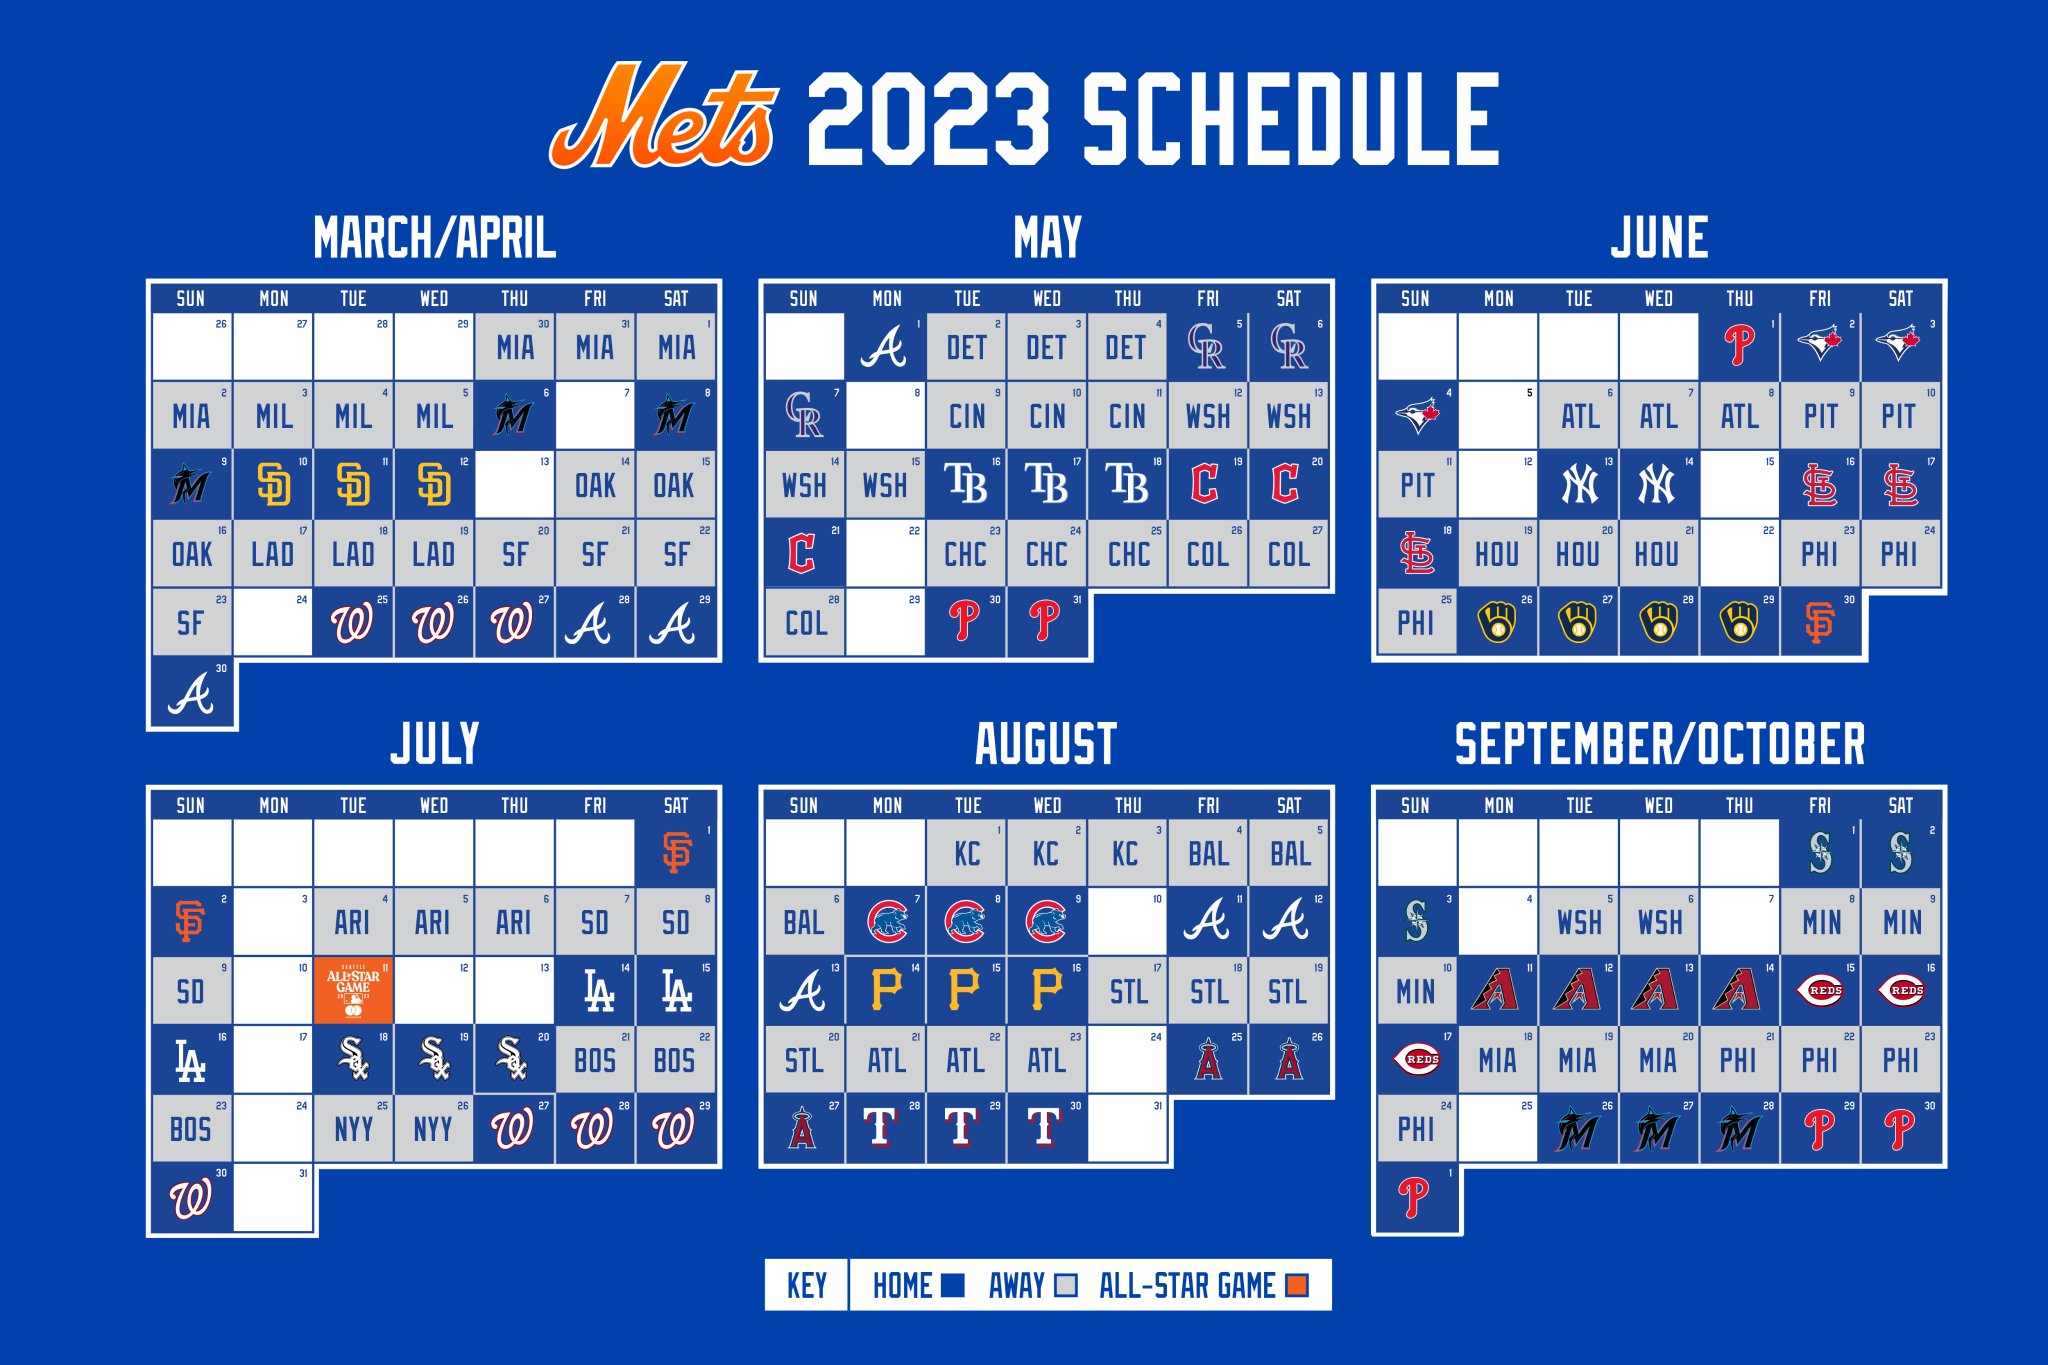 When is NY Mets Opening Day 2023?